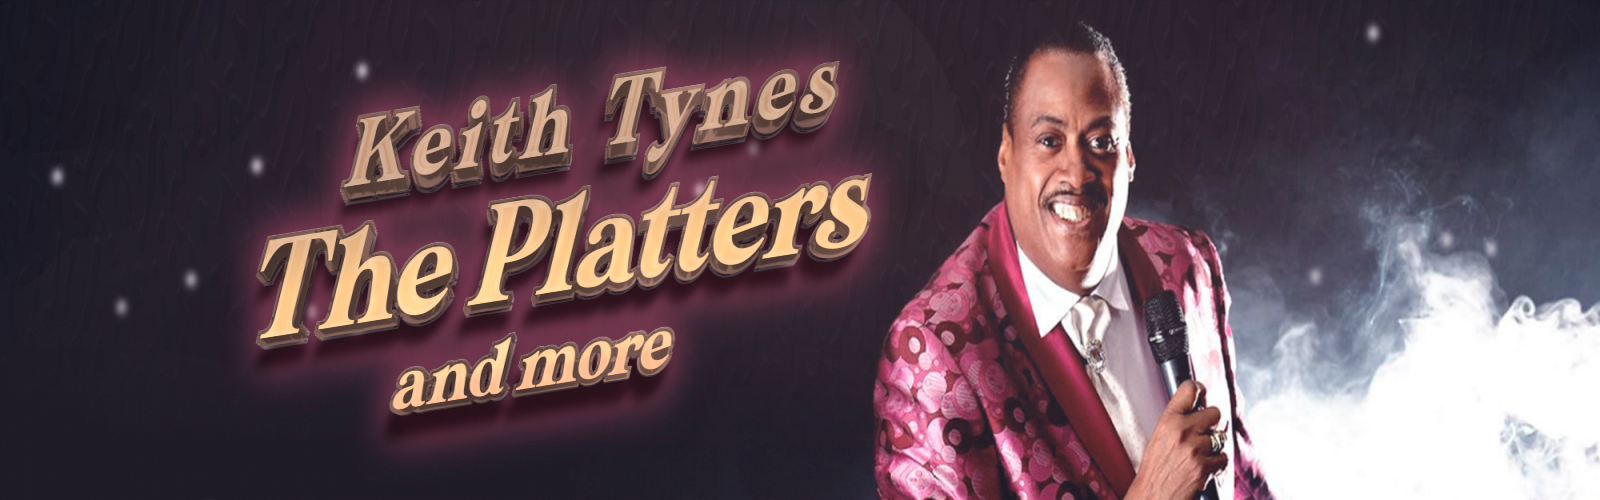 THE PLATTERS AND MORE, Starring Keith Tynes